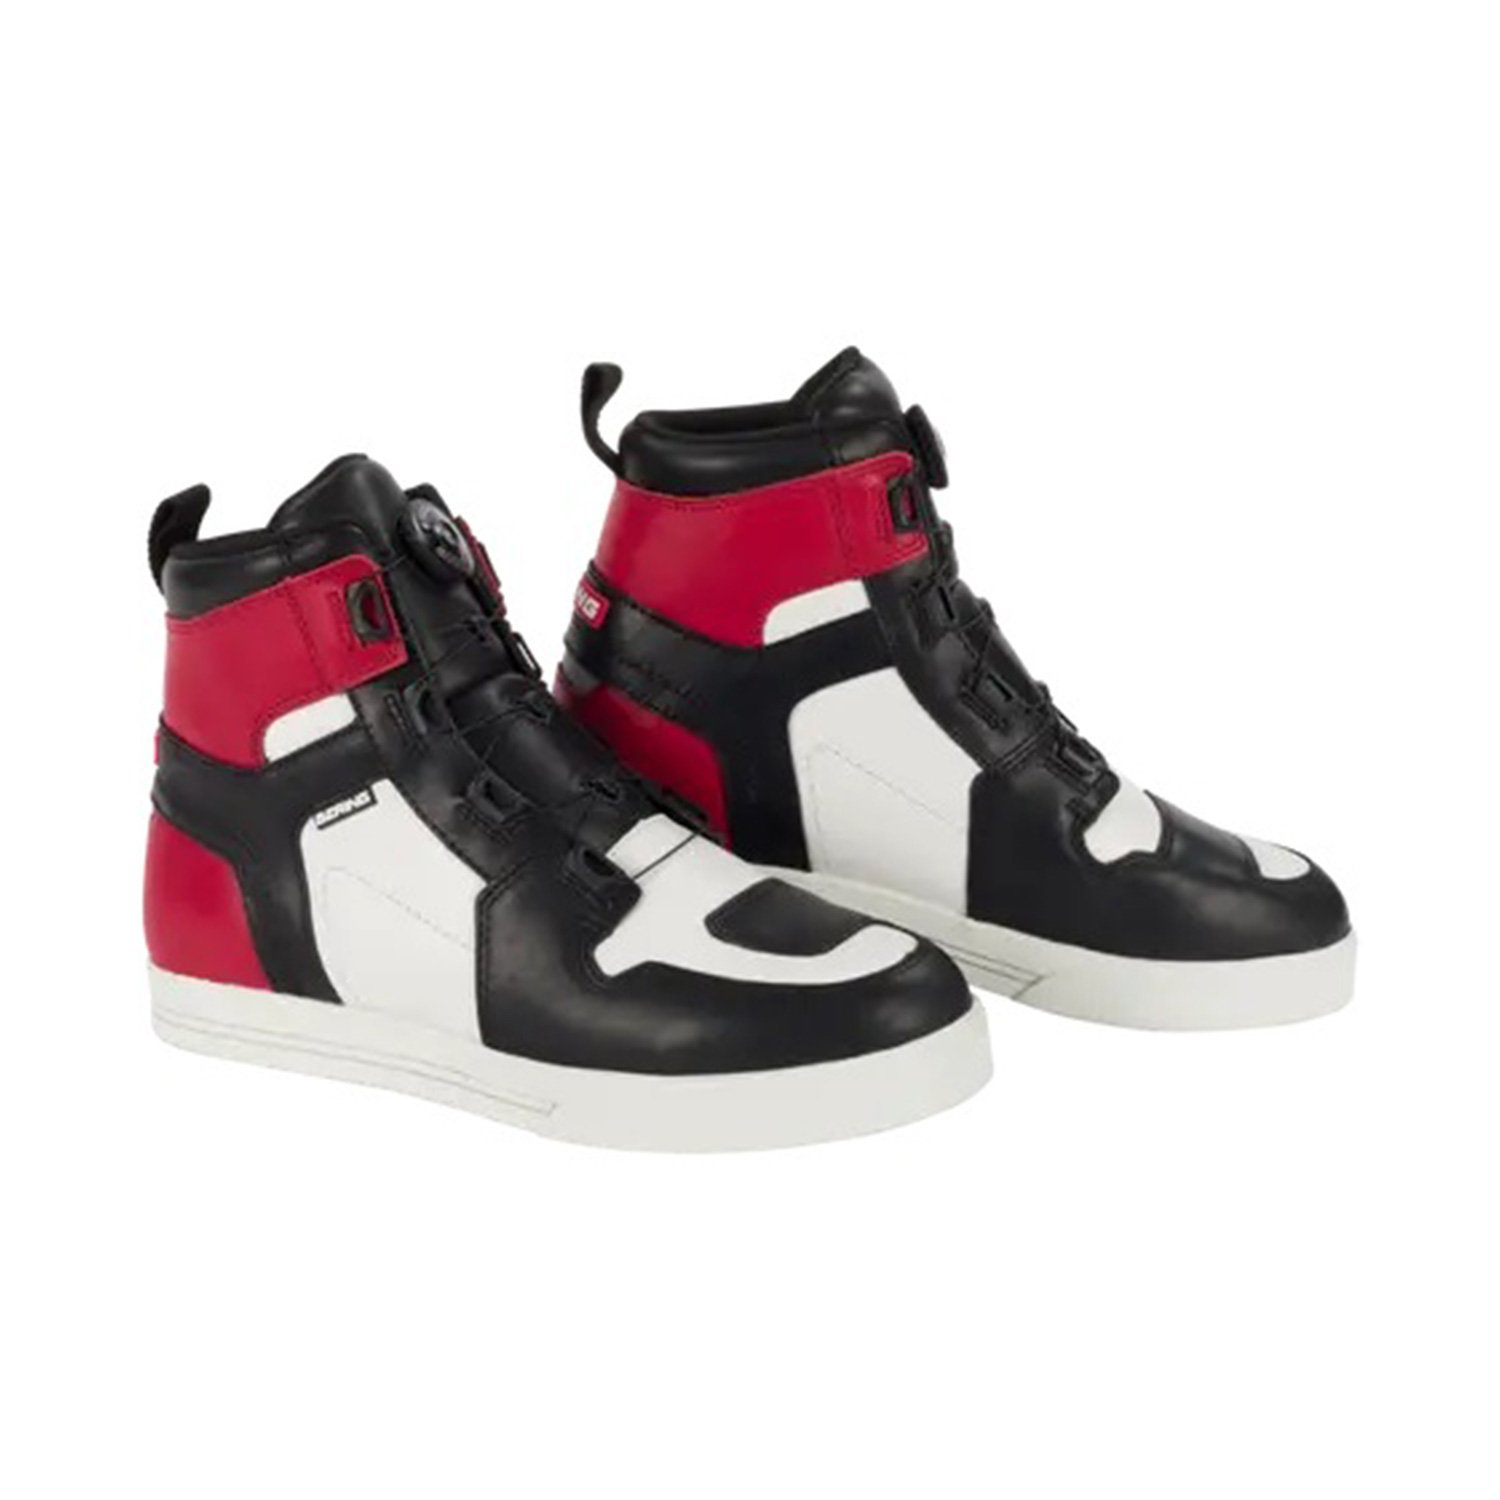 Image of Bering Sneakers Reflex A-Top Black White Red Talla 41